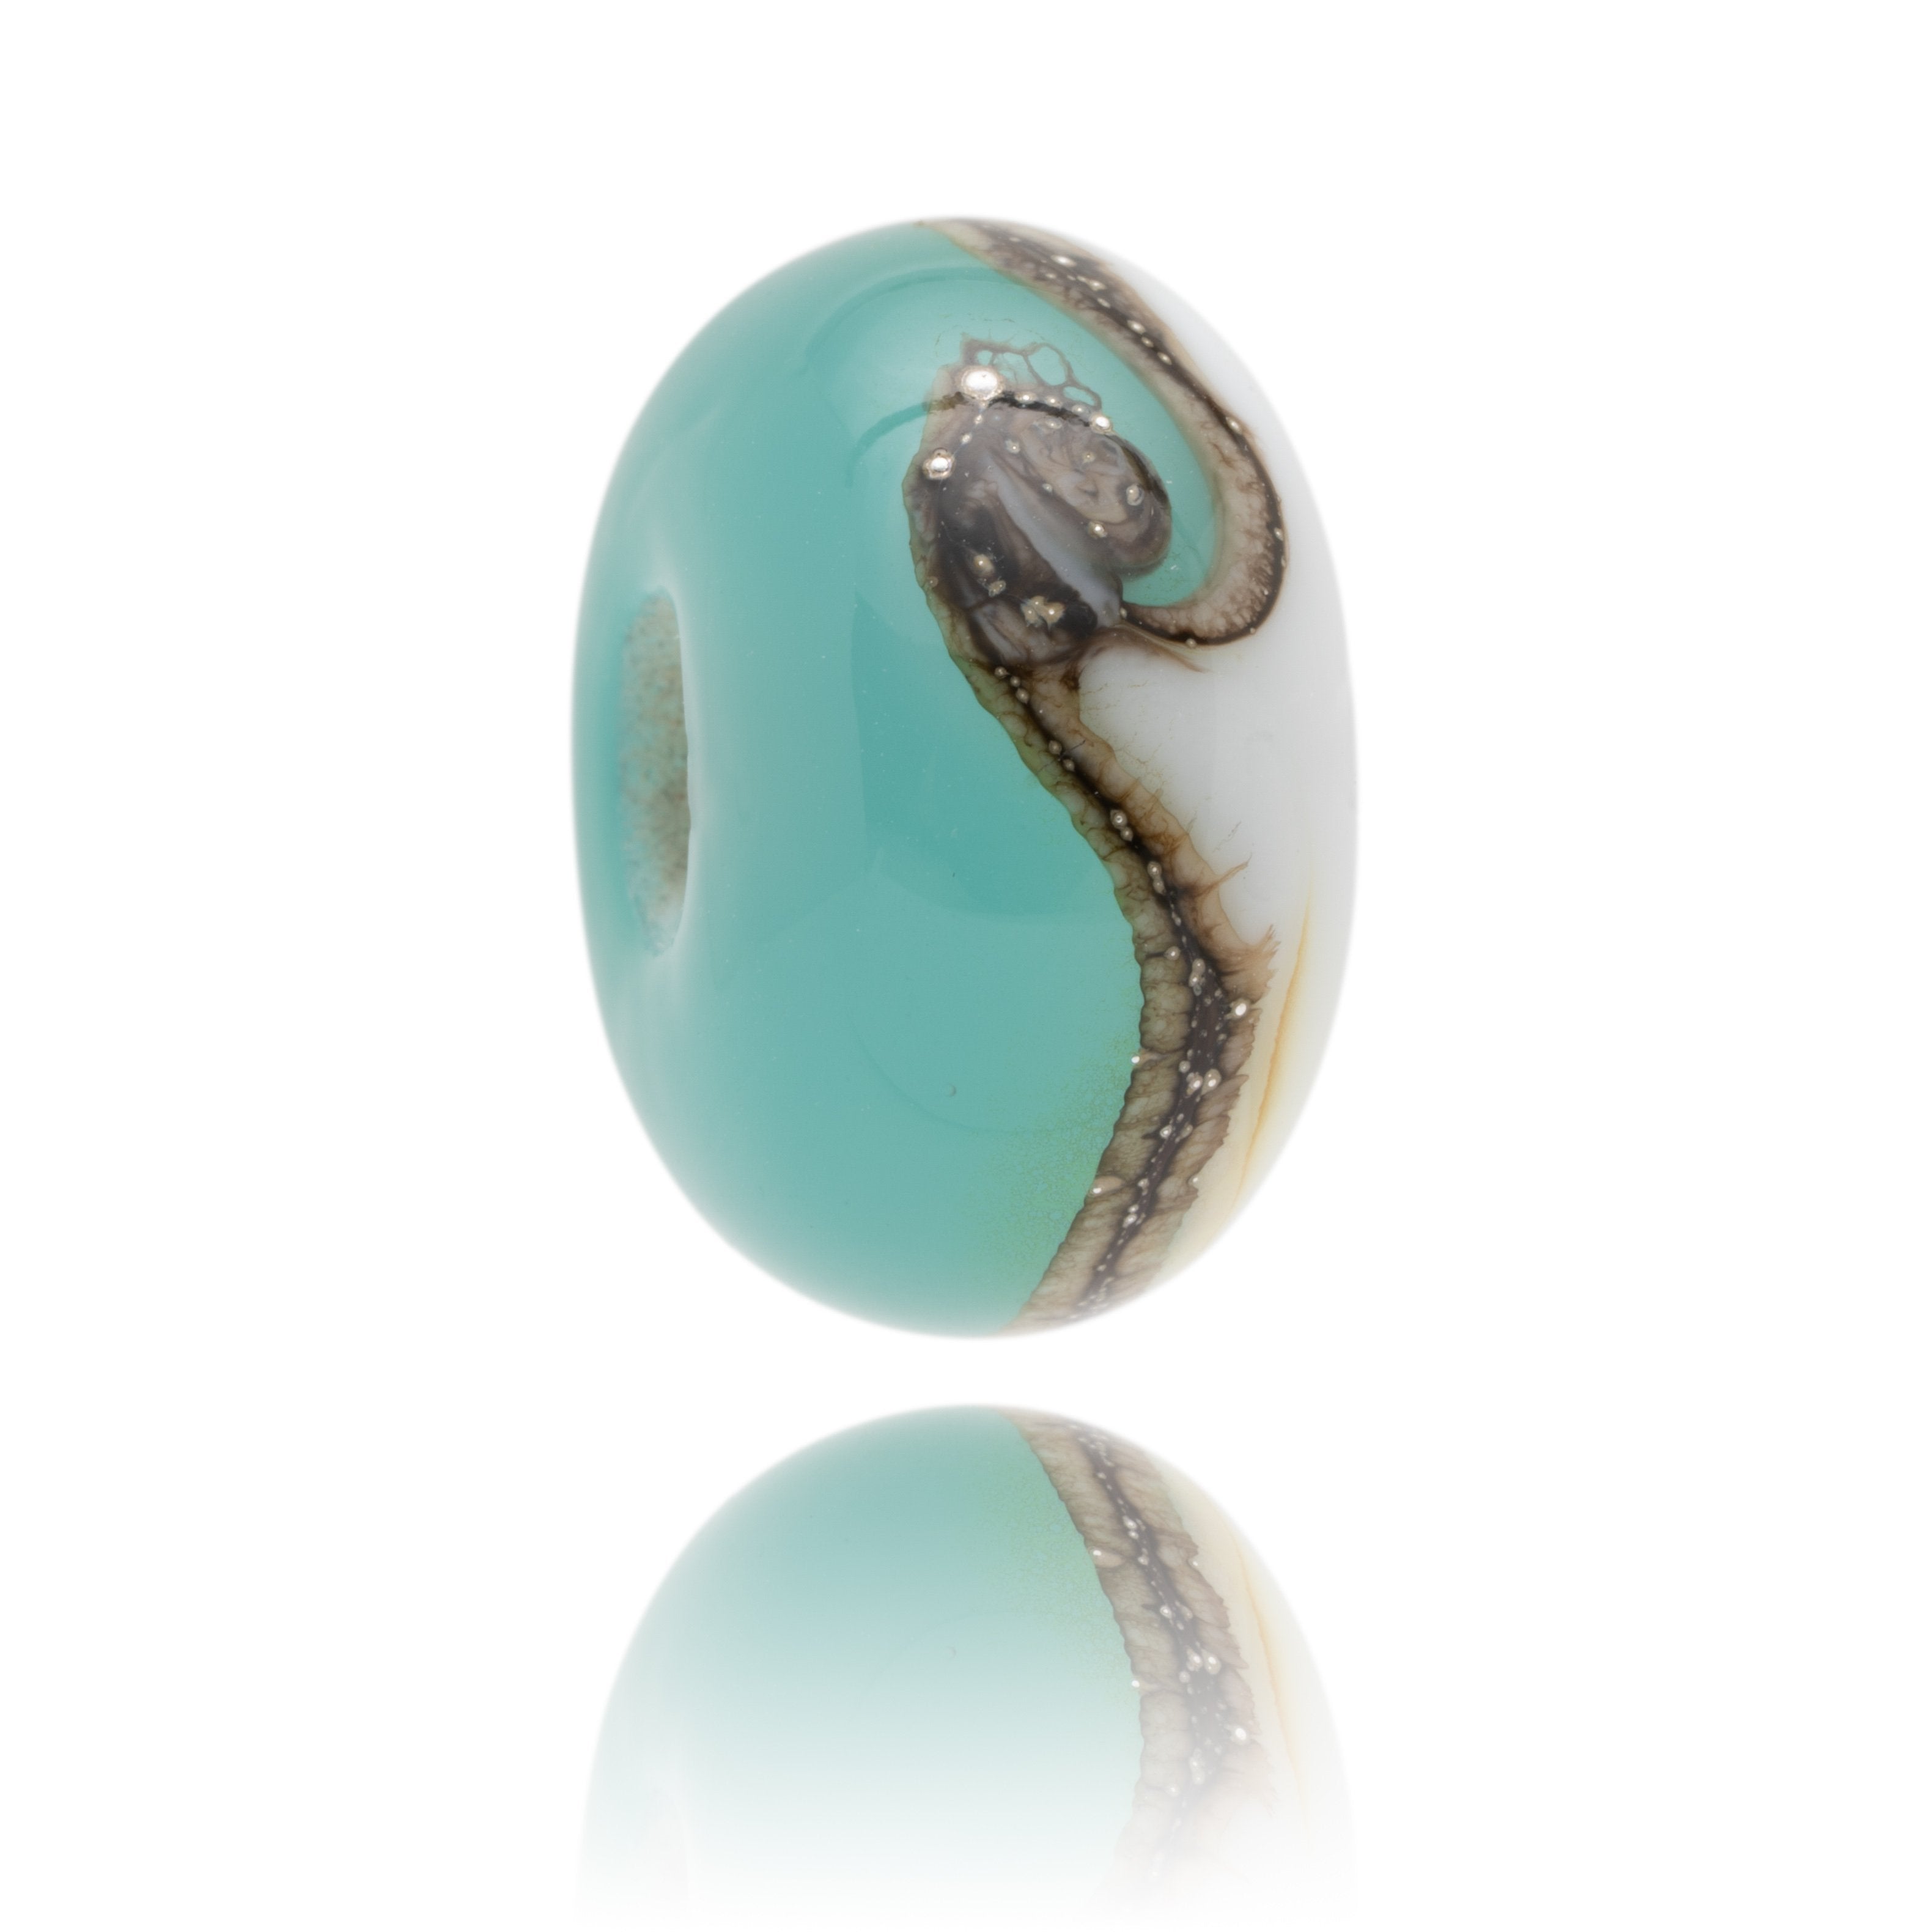 Turquoise glass bead with white one side representing reef break surf spots.